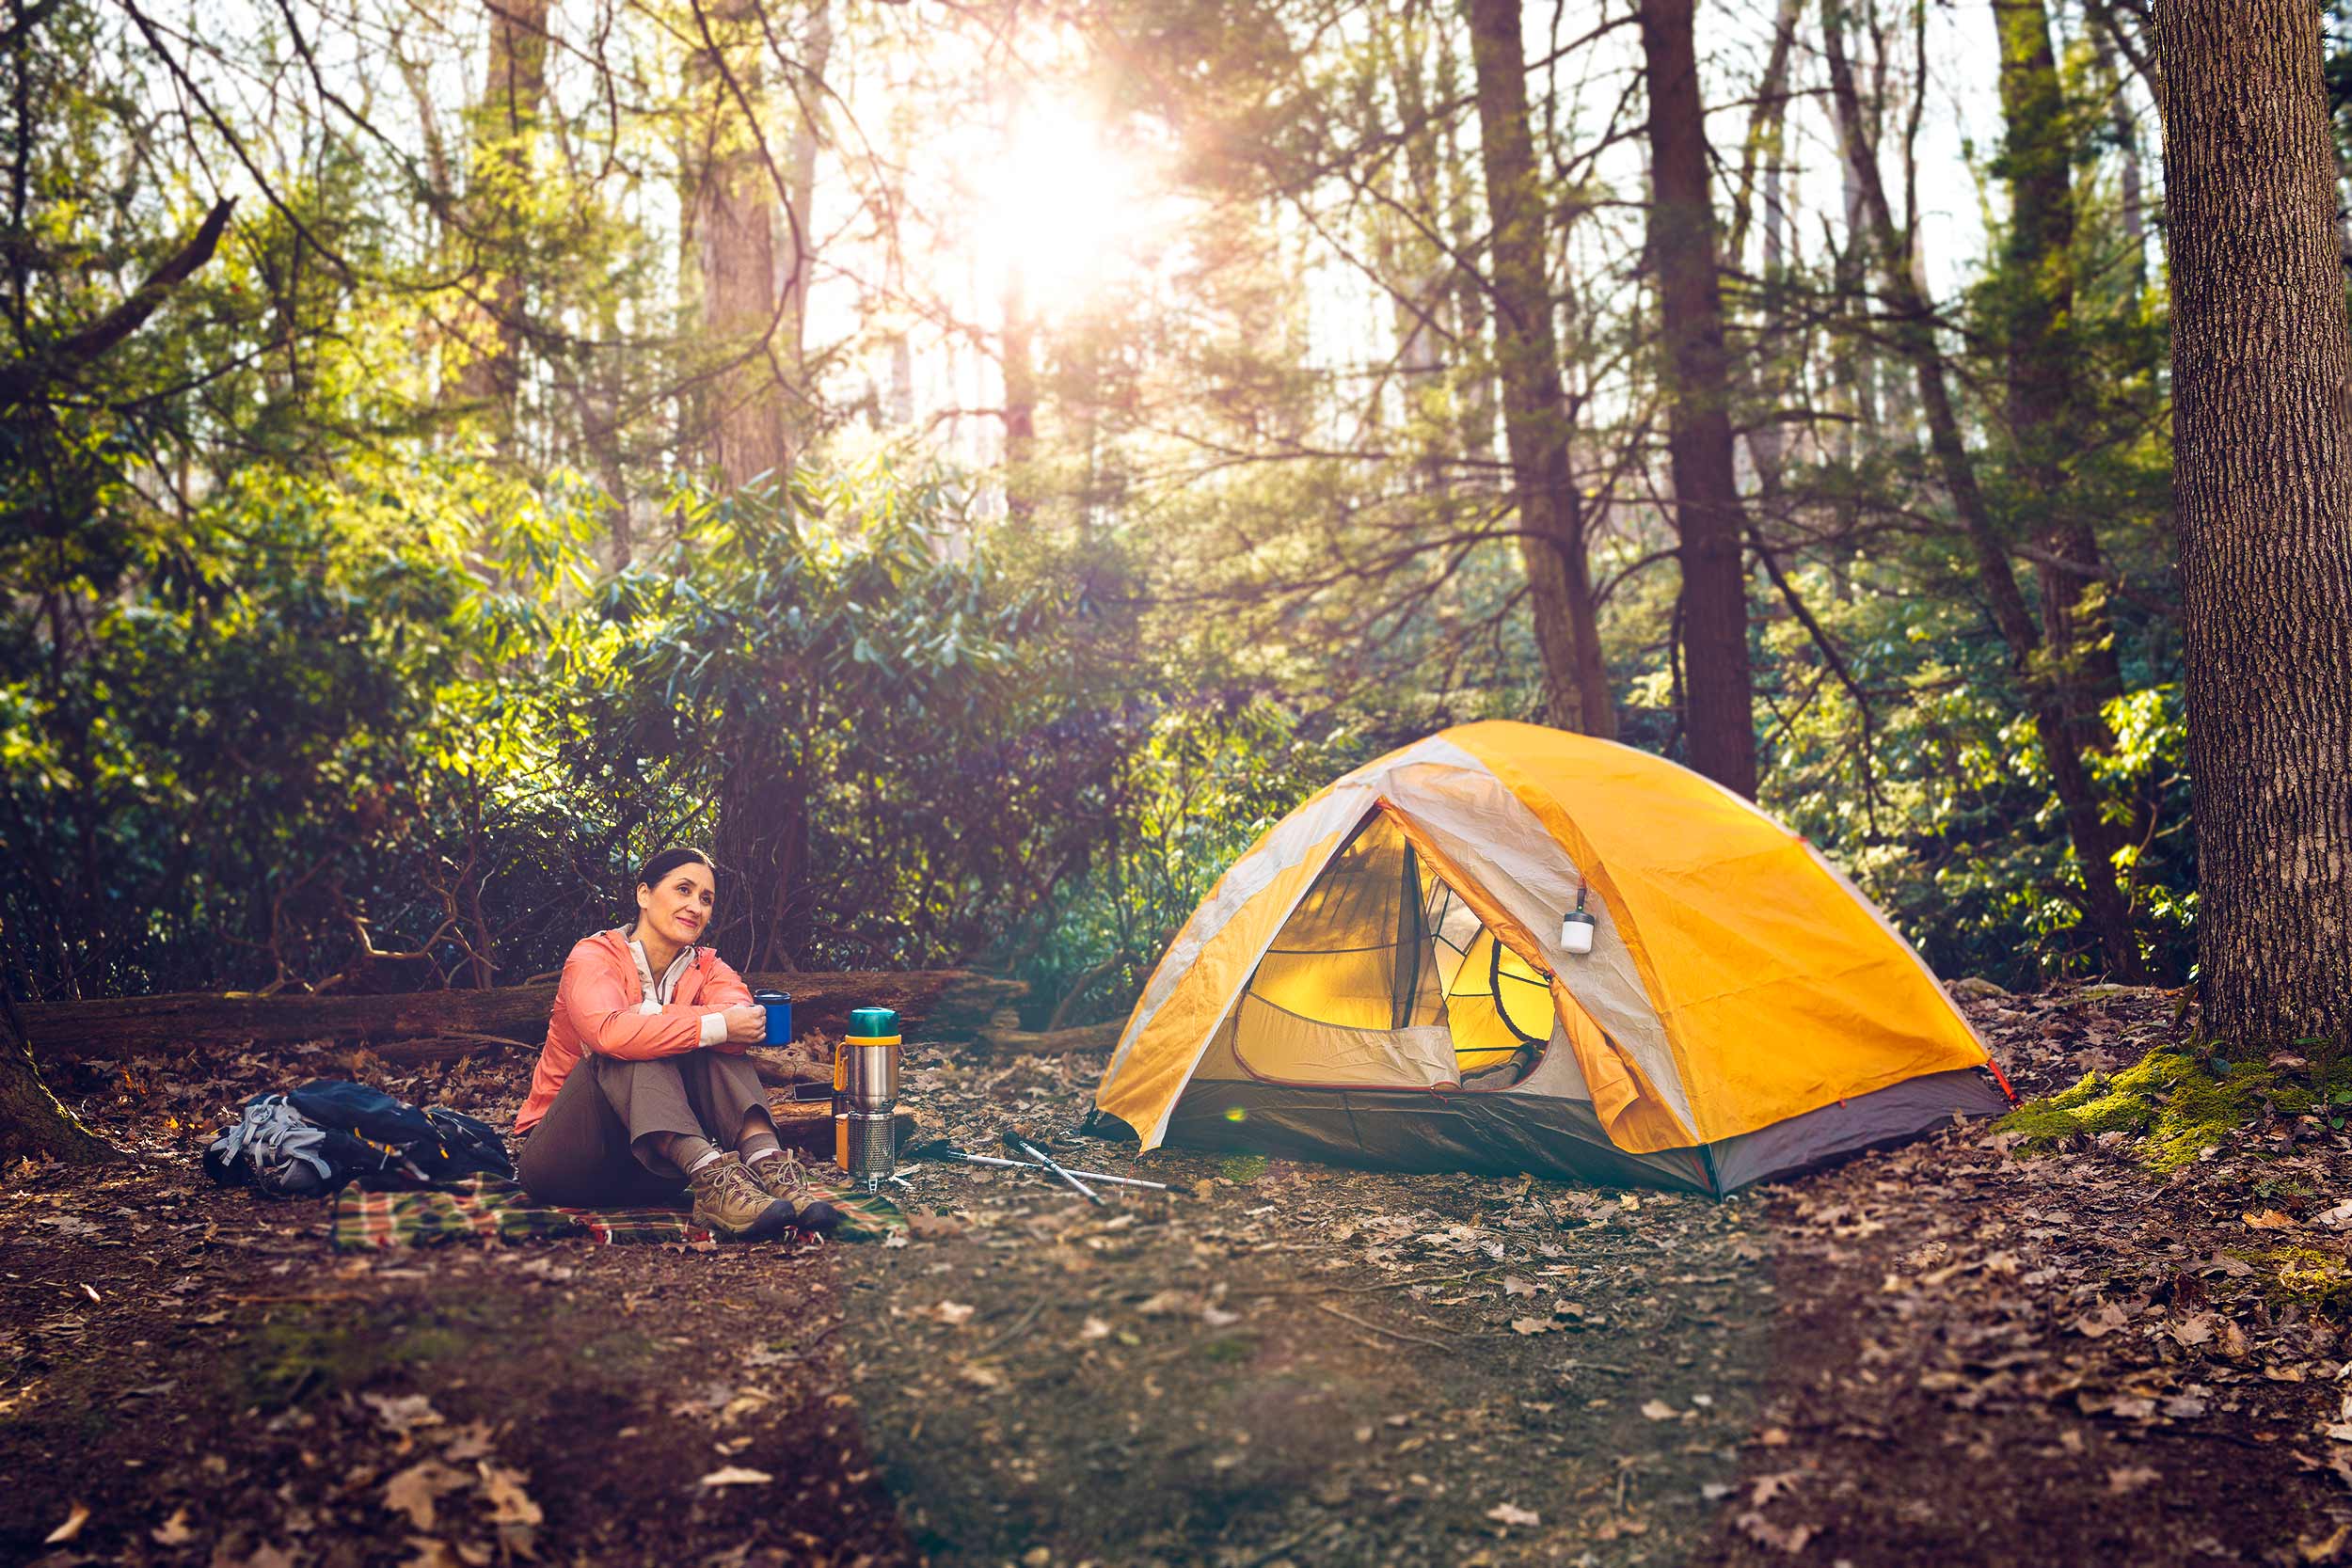 woman-camping-with-tent-highmark-dc-commercial-photography-eli-meir-kaplan